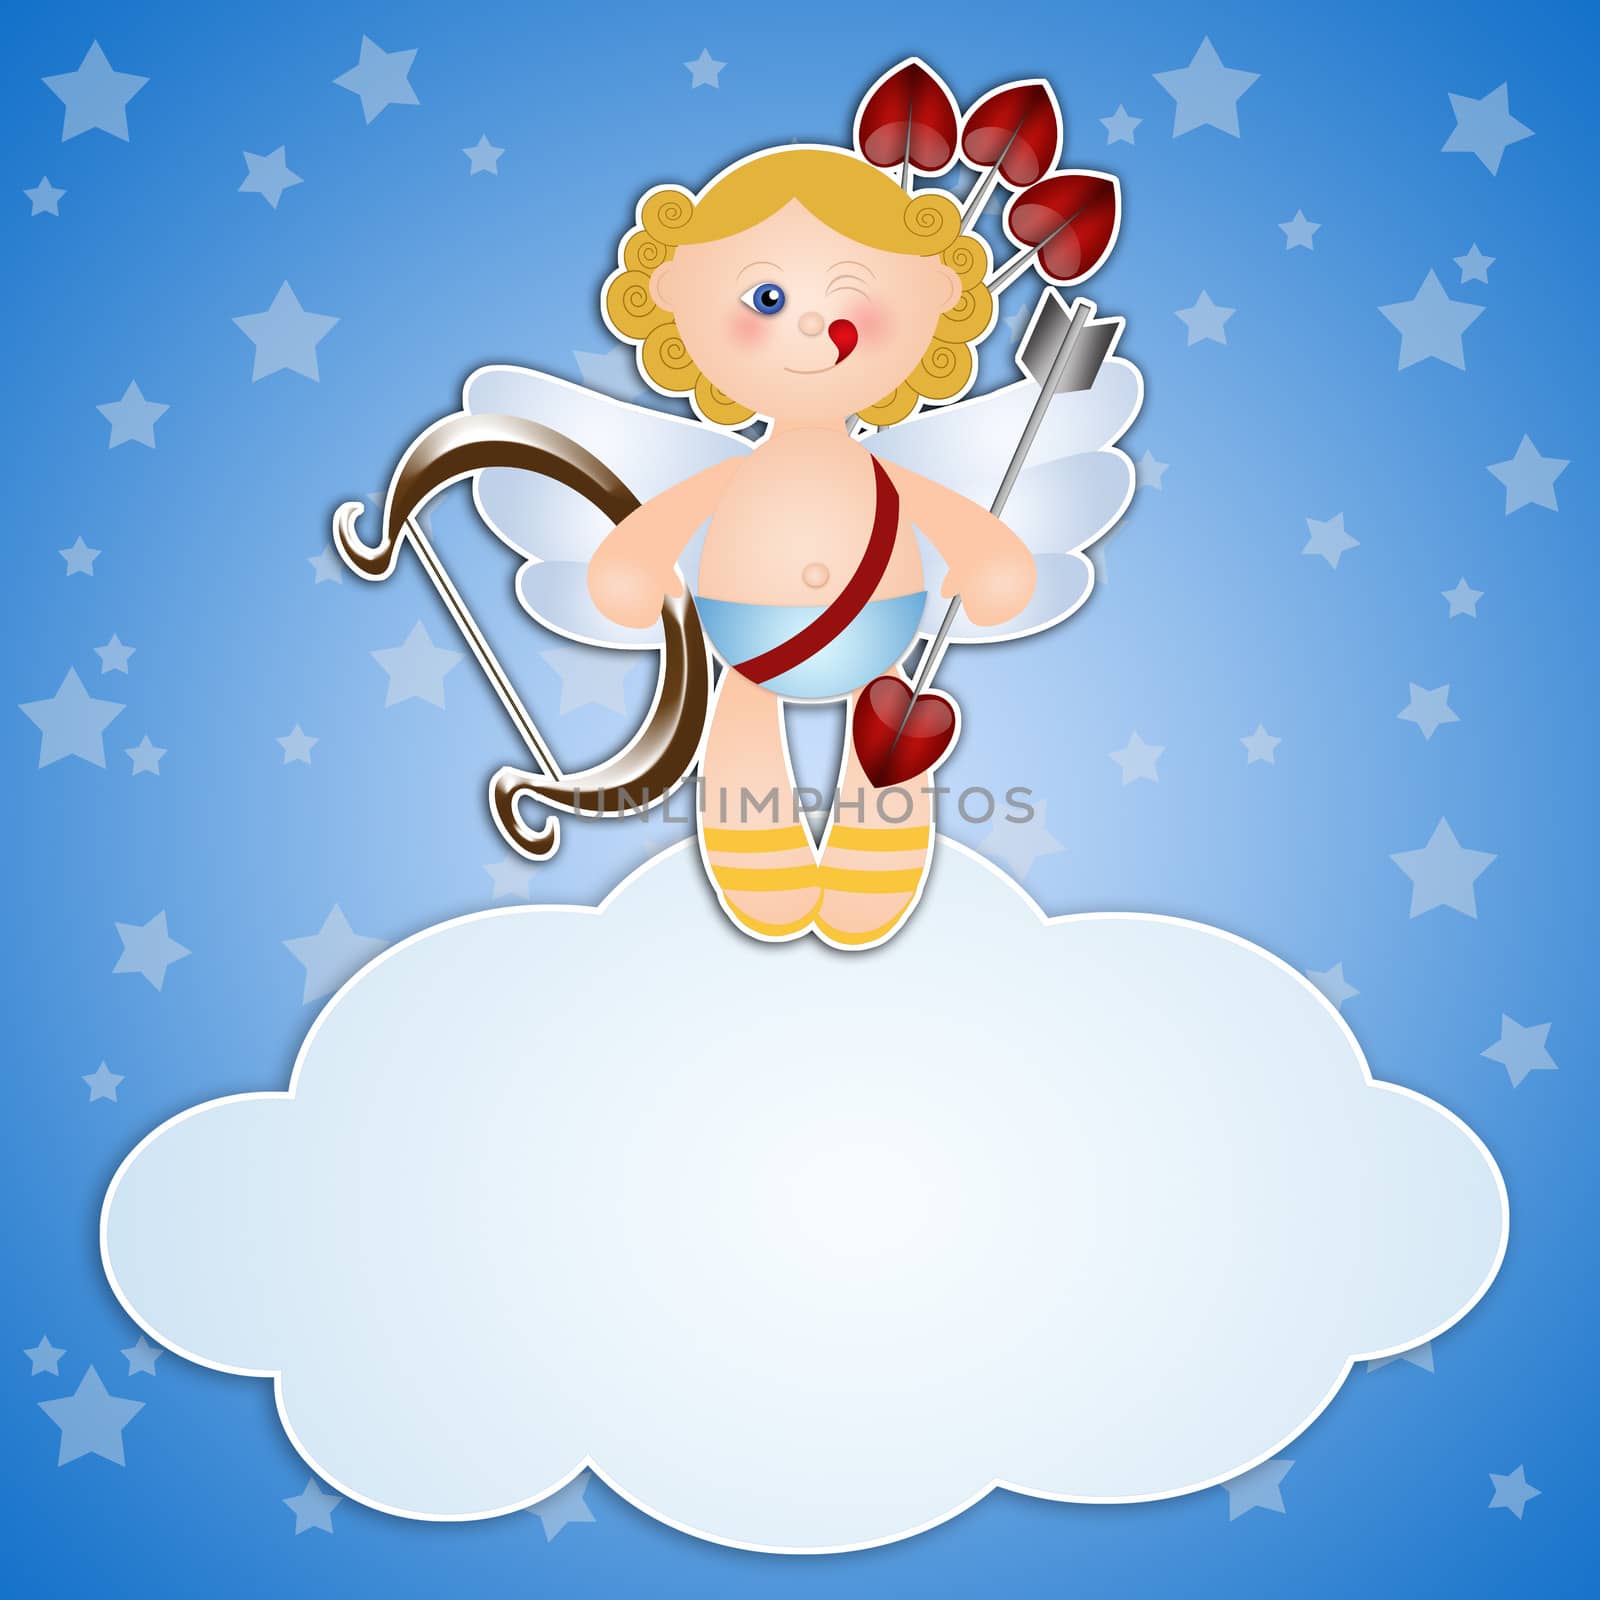 Cupid on cloud for Valentine's Day